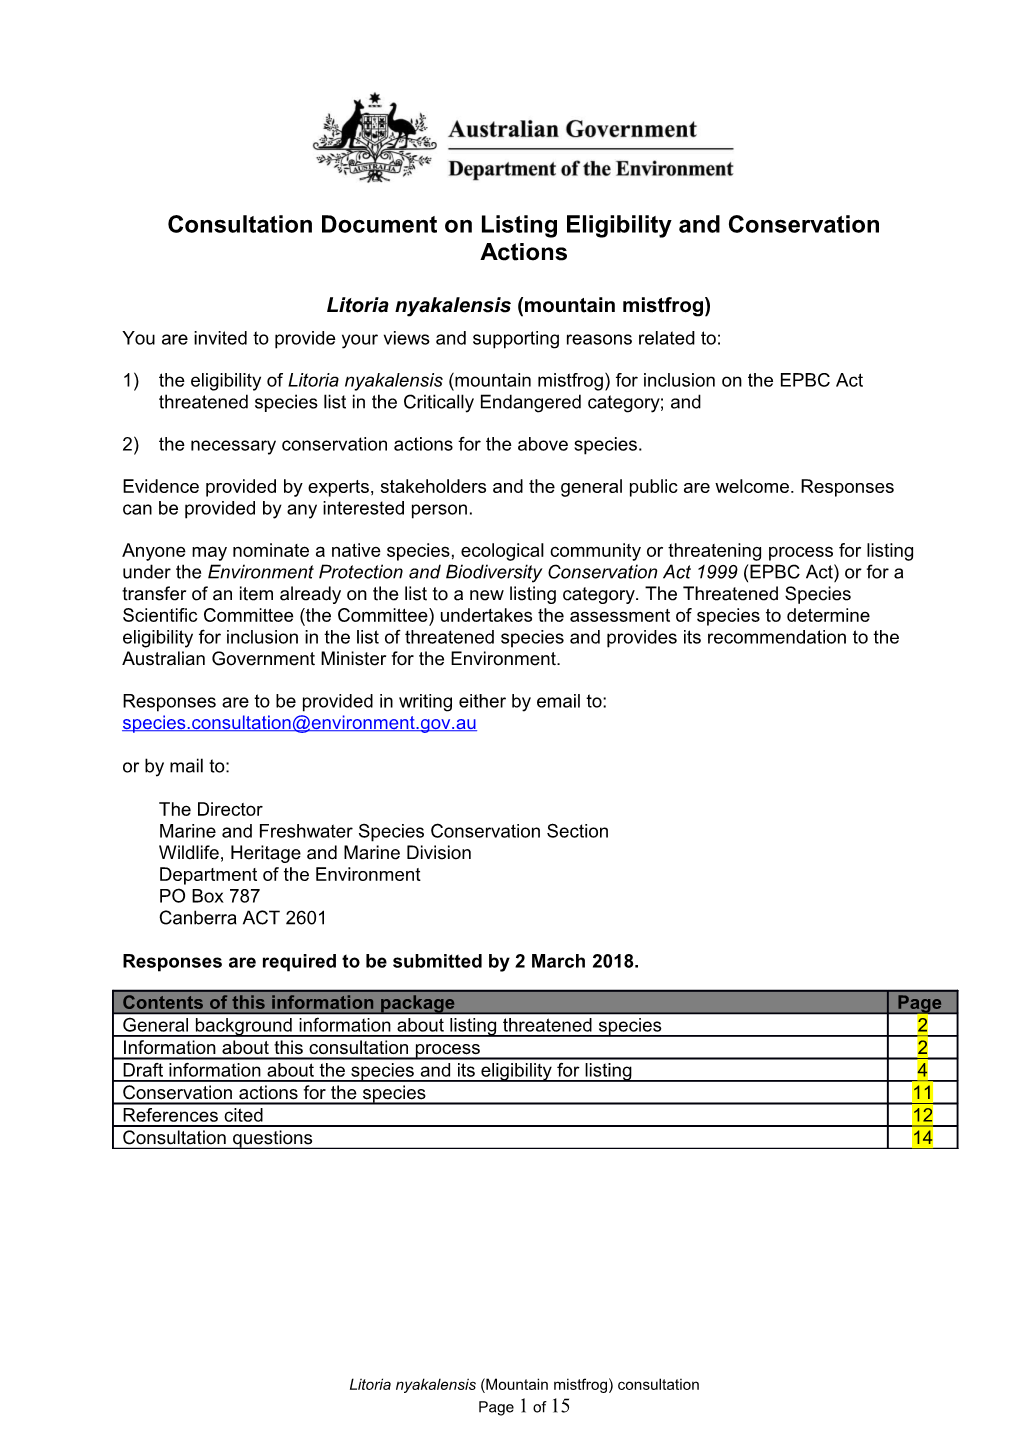 Consultation Document on Listing Eligibility and Conservation Actions Litoria Nyakalensis